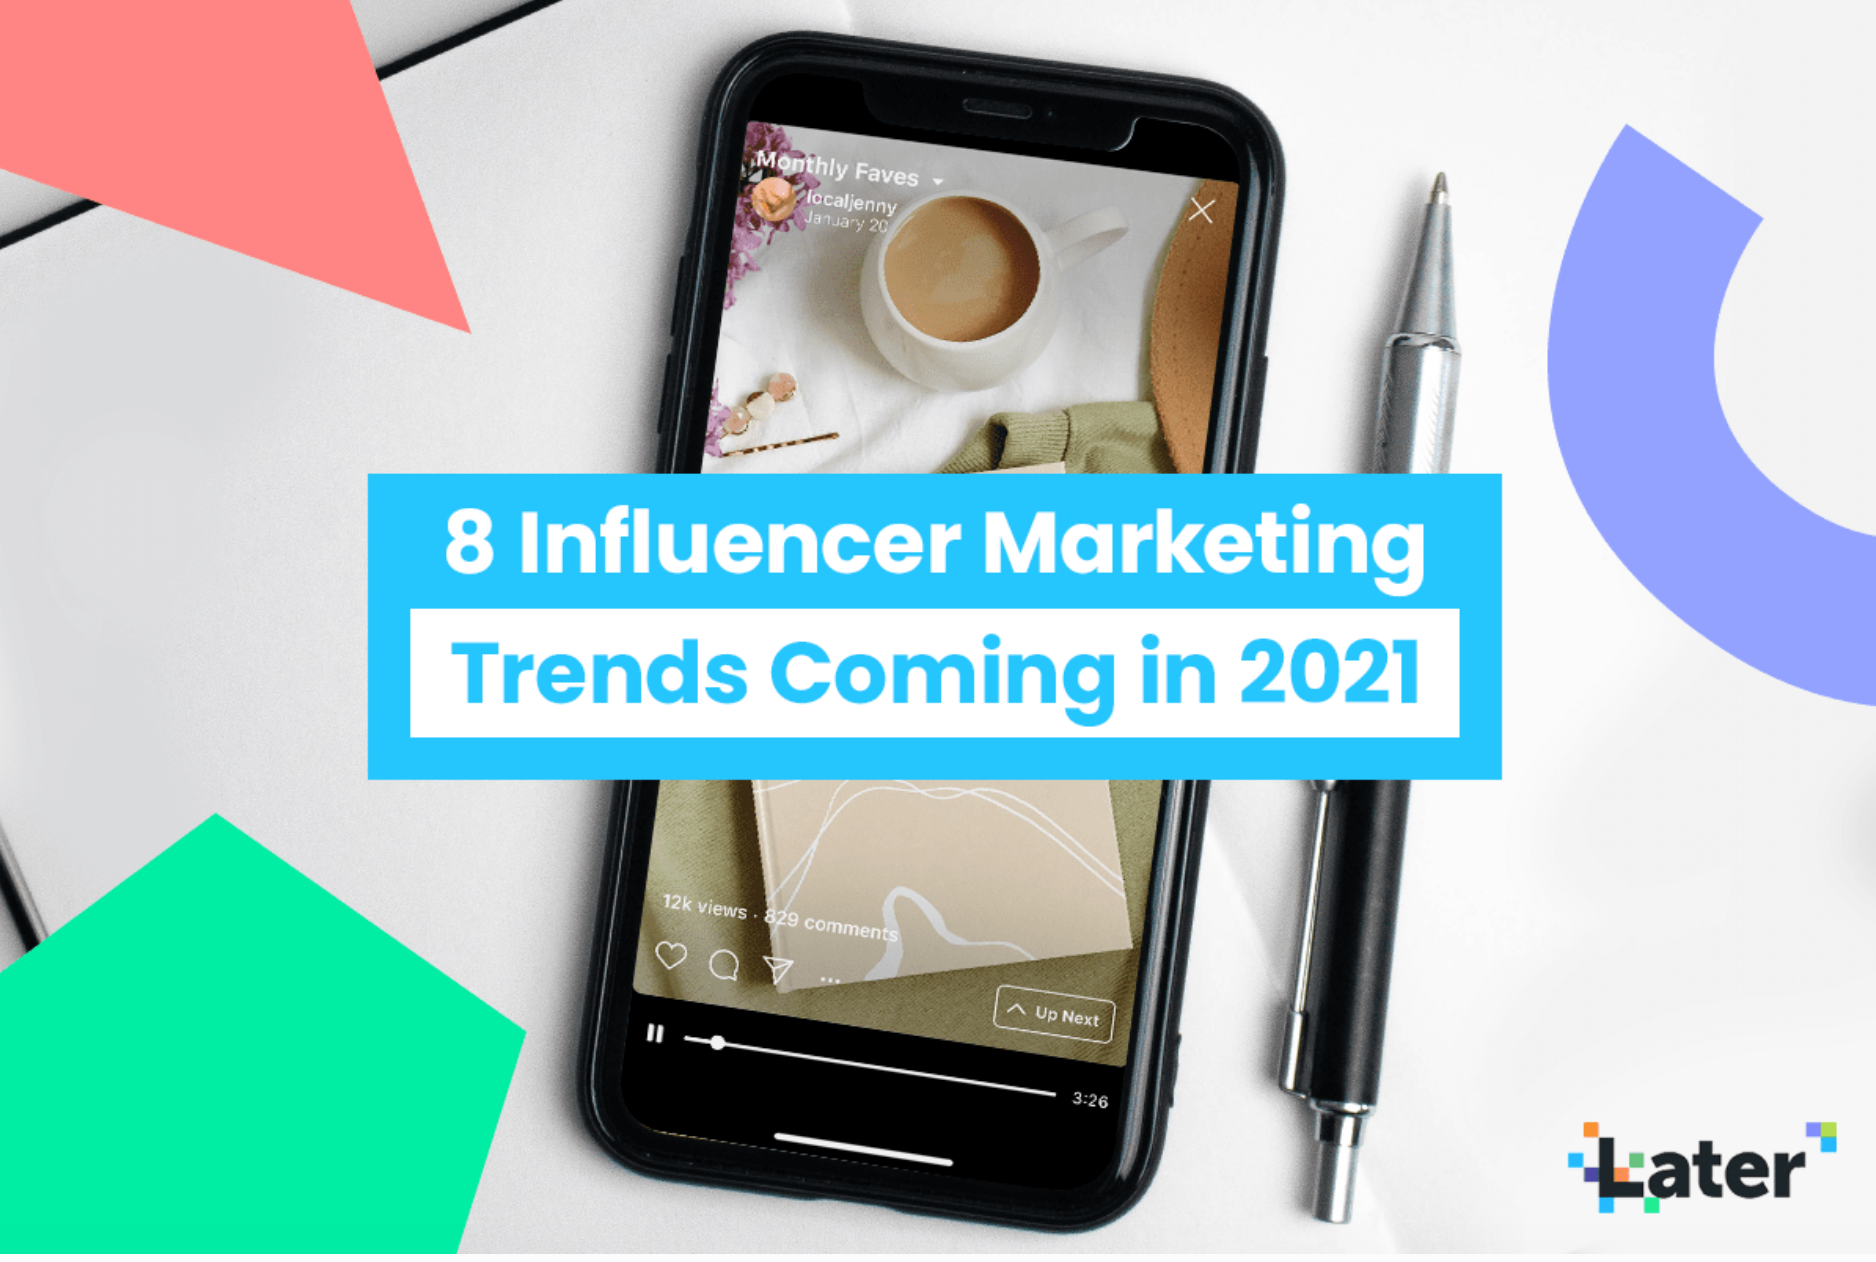 Influencer Marketing: The Marketing of the Future